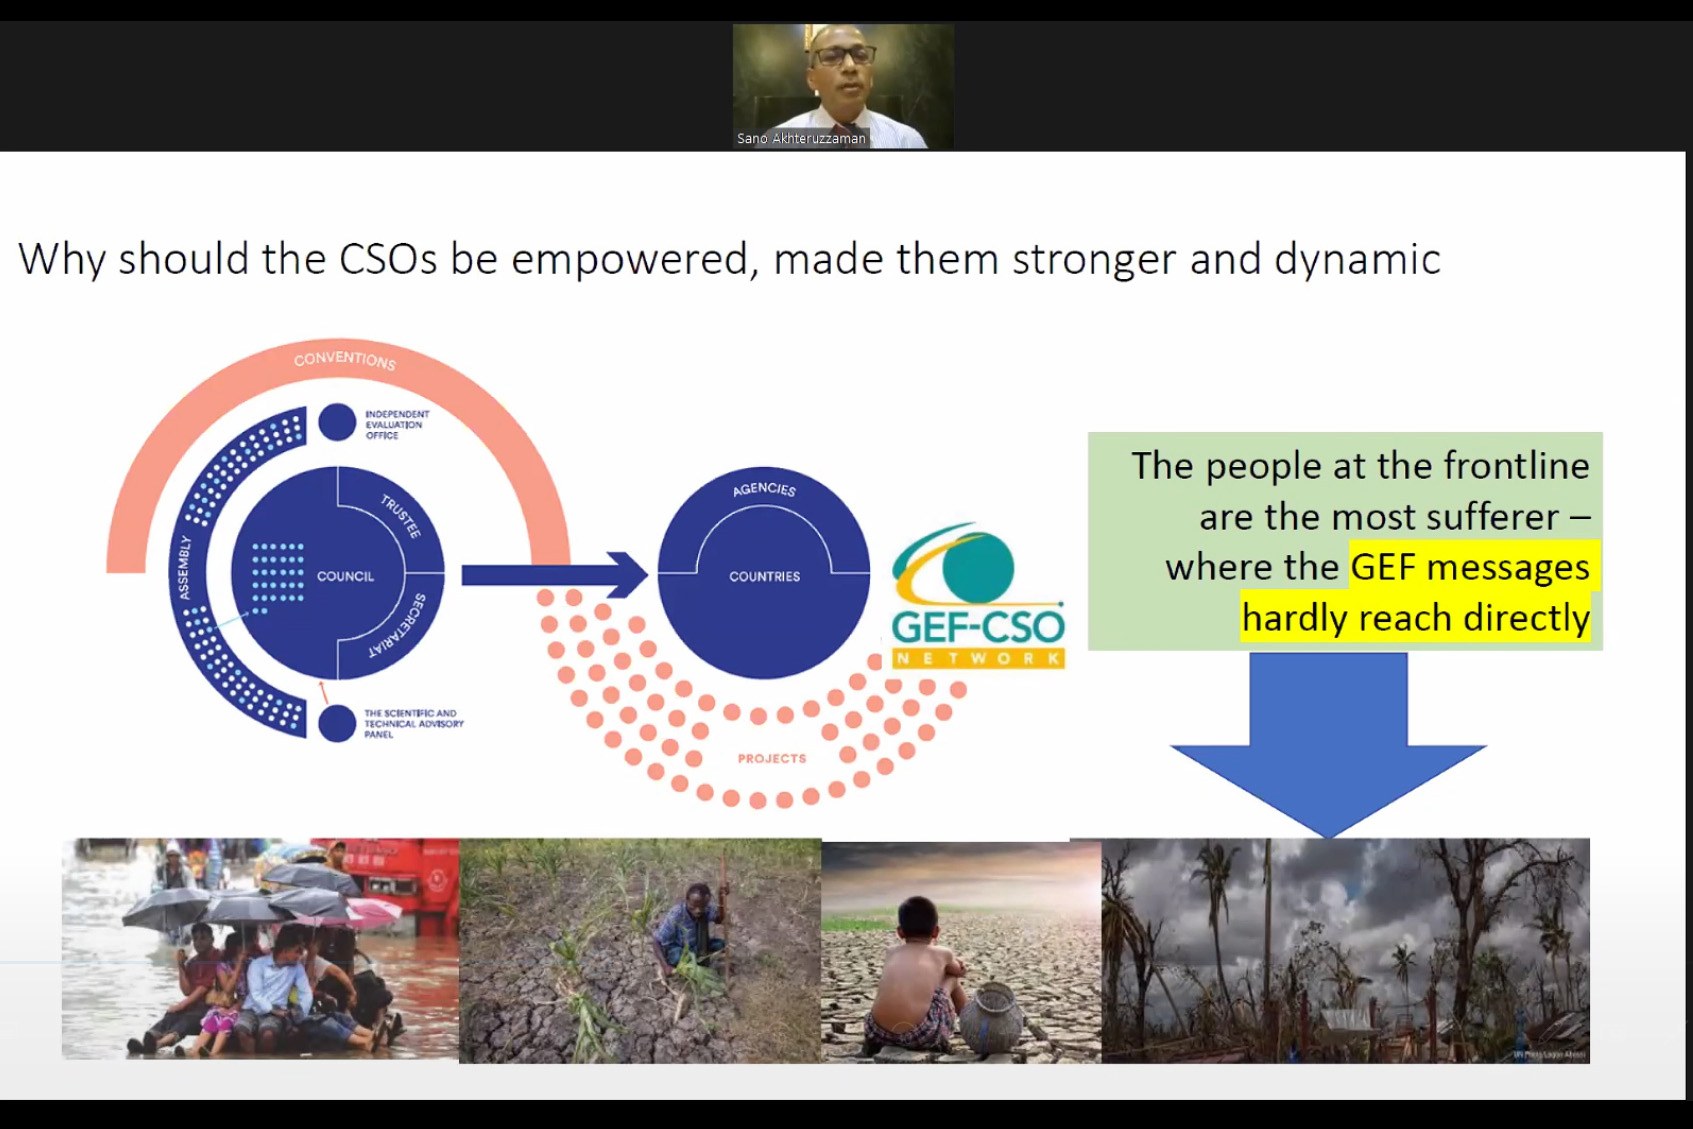 PowerPoint slide from the presentation by Akhteruzzaman Sano, Chair, GEF CSO Network